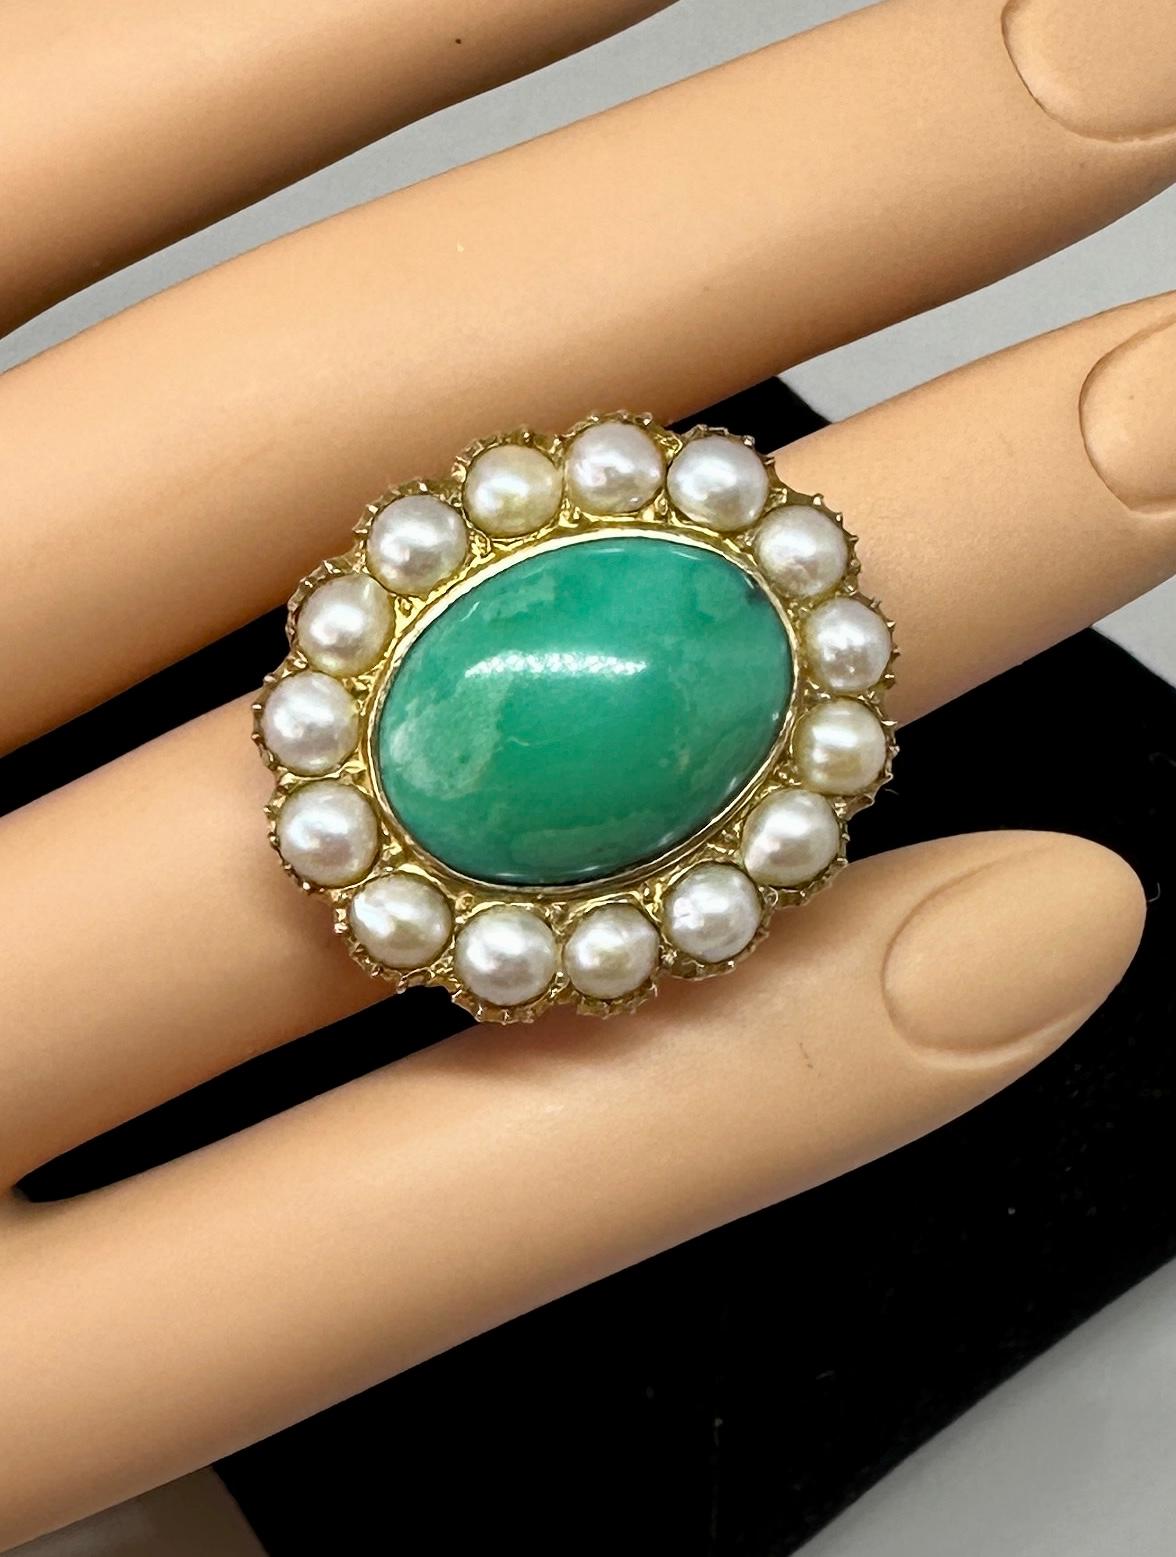 This is a gorgeous antique Turquoise Ring with a Pearl Halo.  In the center is a stunning 19mm by 14mm by 5mm Turquoise Cabochon.  The ring is from the estate of Hollywood Legend Mary Lou Daves and was a gift from her husband, the director Delbert